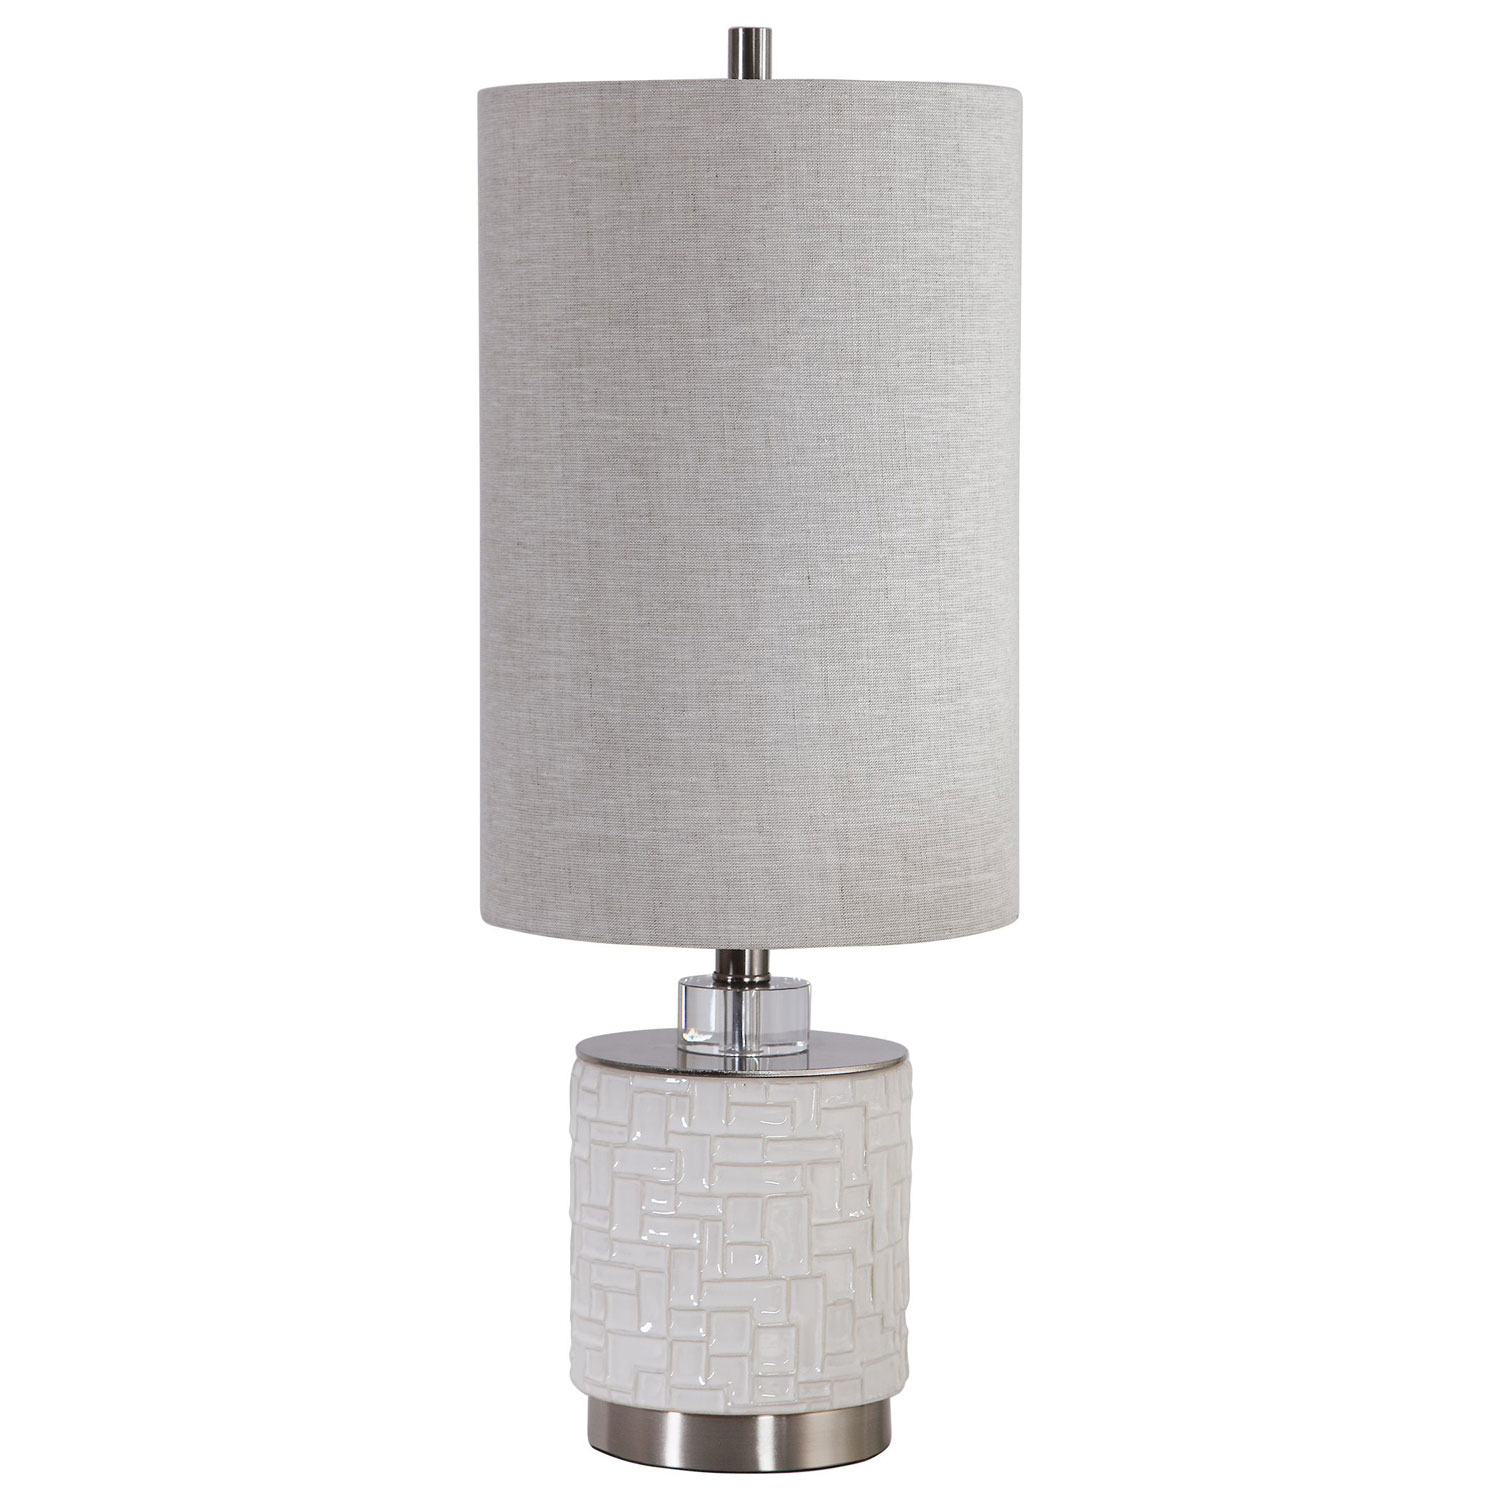 Uttermost Elyn Accent Lamp - Glossy White